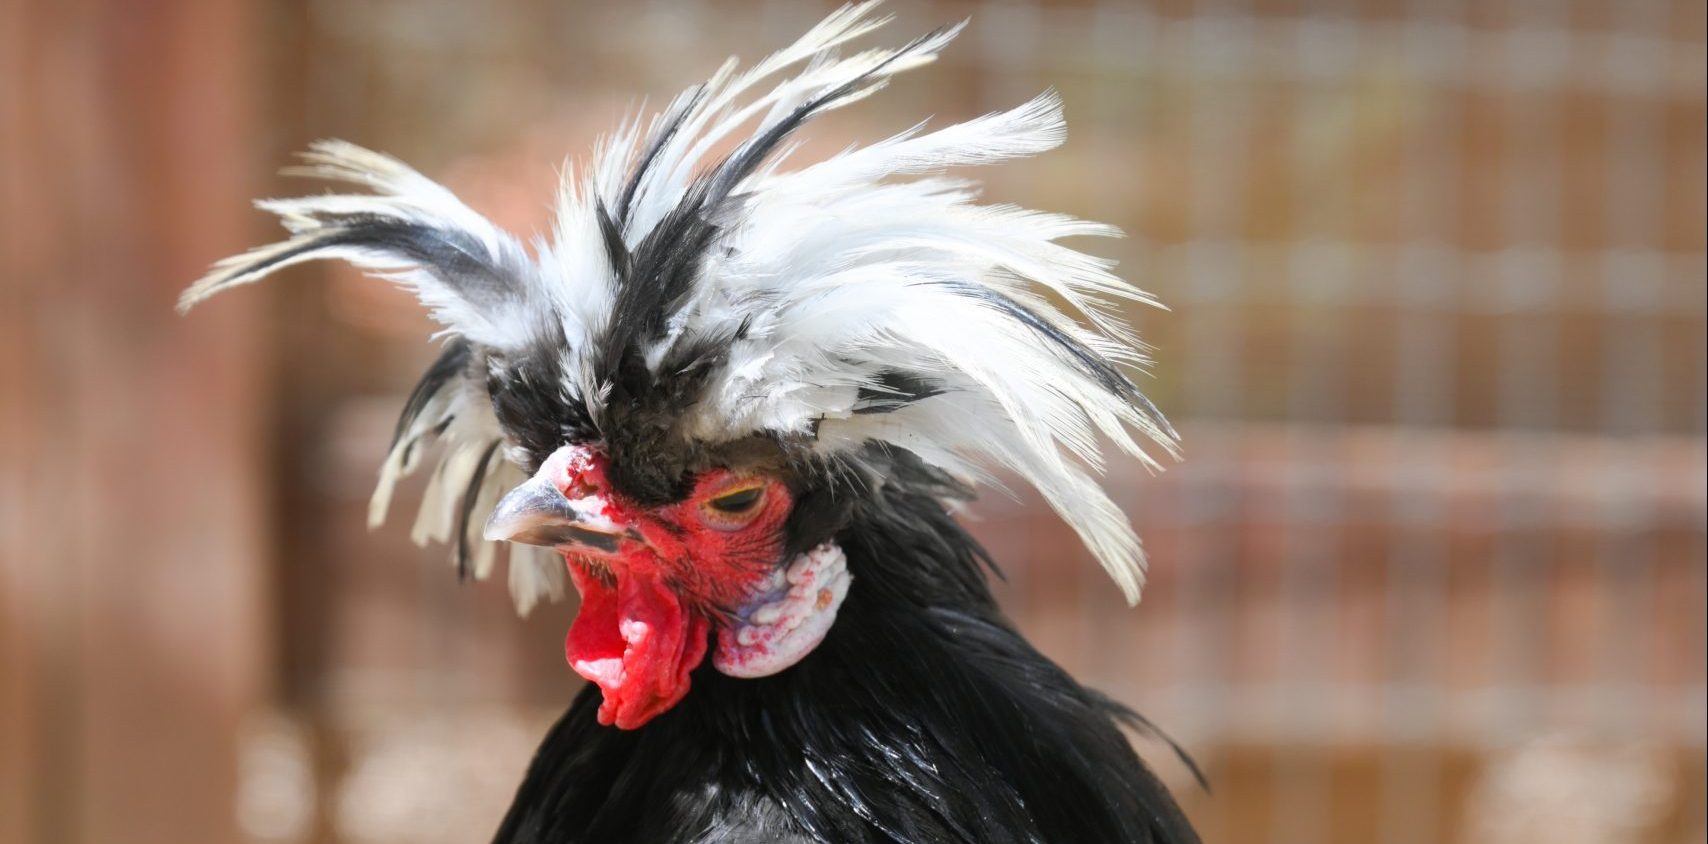 Stephen Rooster at Farm Sanctuary's Southern California shelter